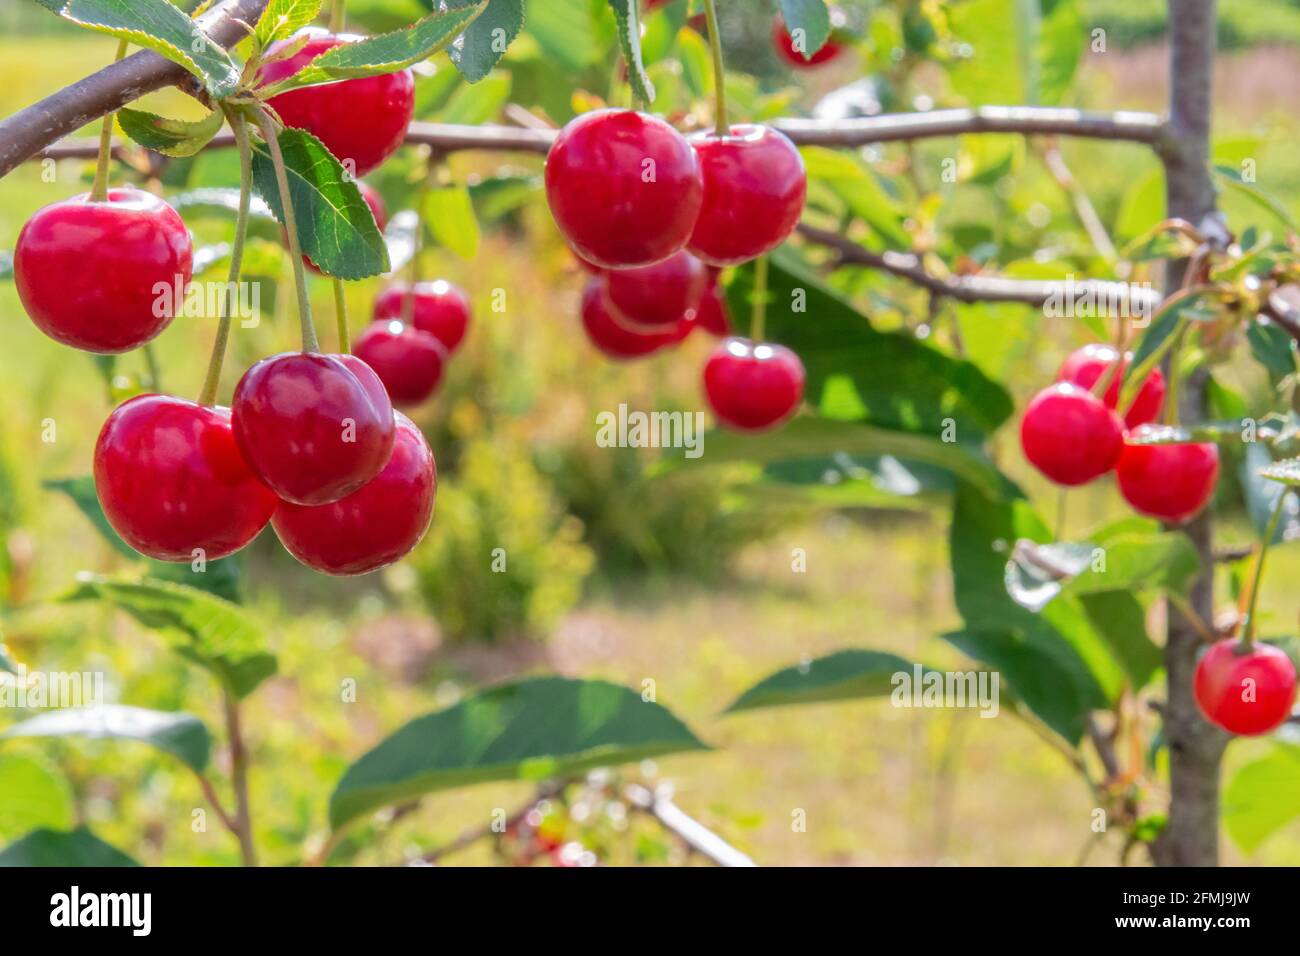 Fresh red cherry berries on tree branch in garden. Close-up view